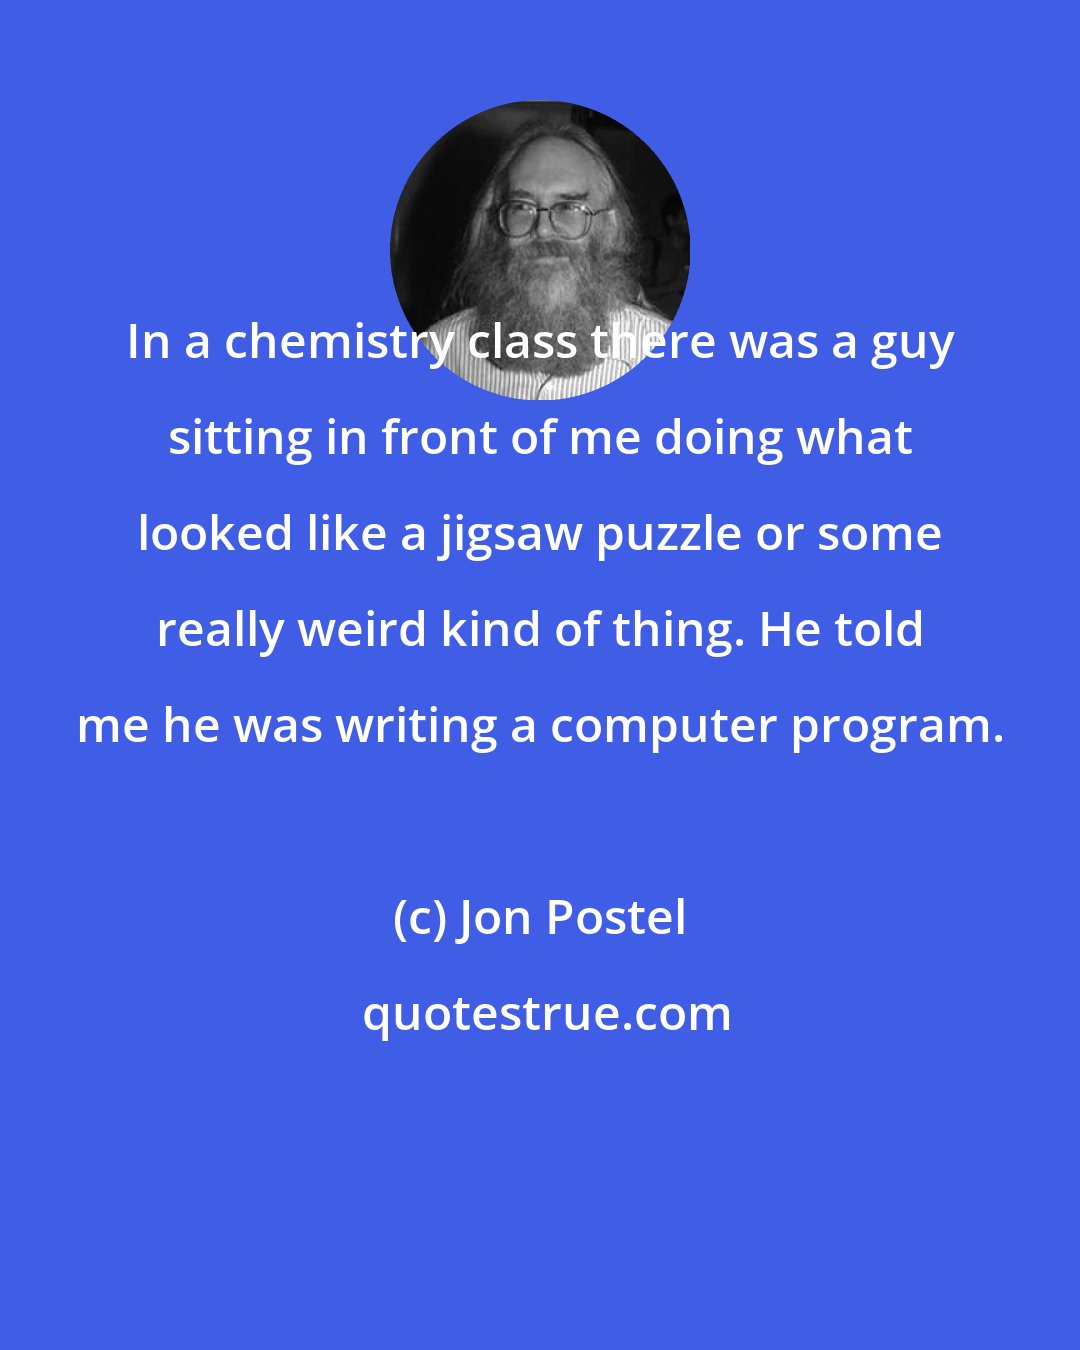 Jon Postel: In a chemistry class there was a guy sitting in front of me doing what looked like a jigsaw puzzle or some really weird kind of thing. He told me he was writing a computer program.